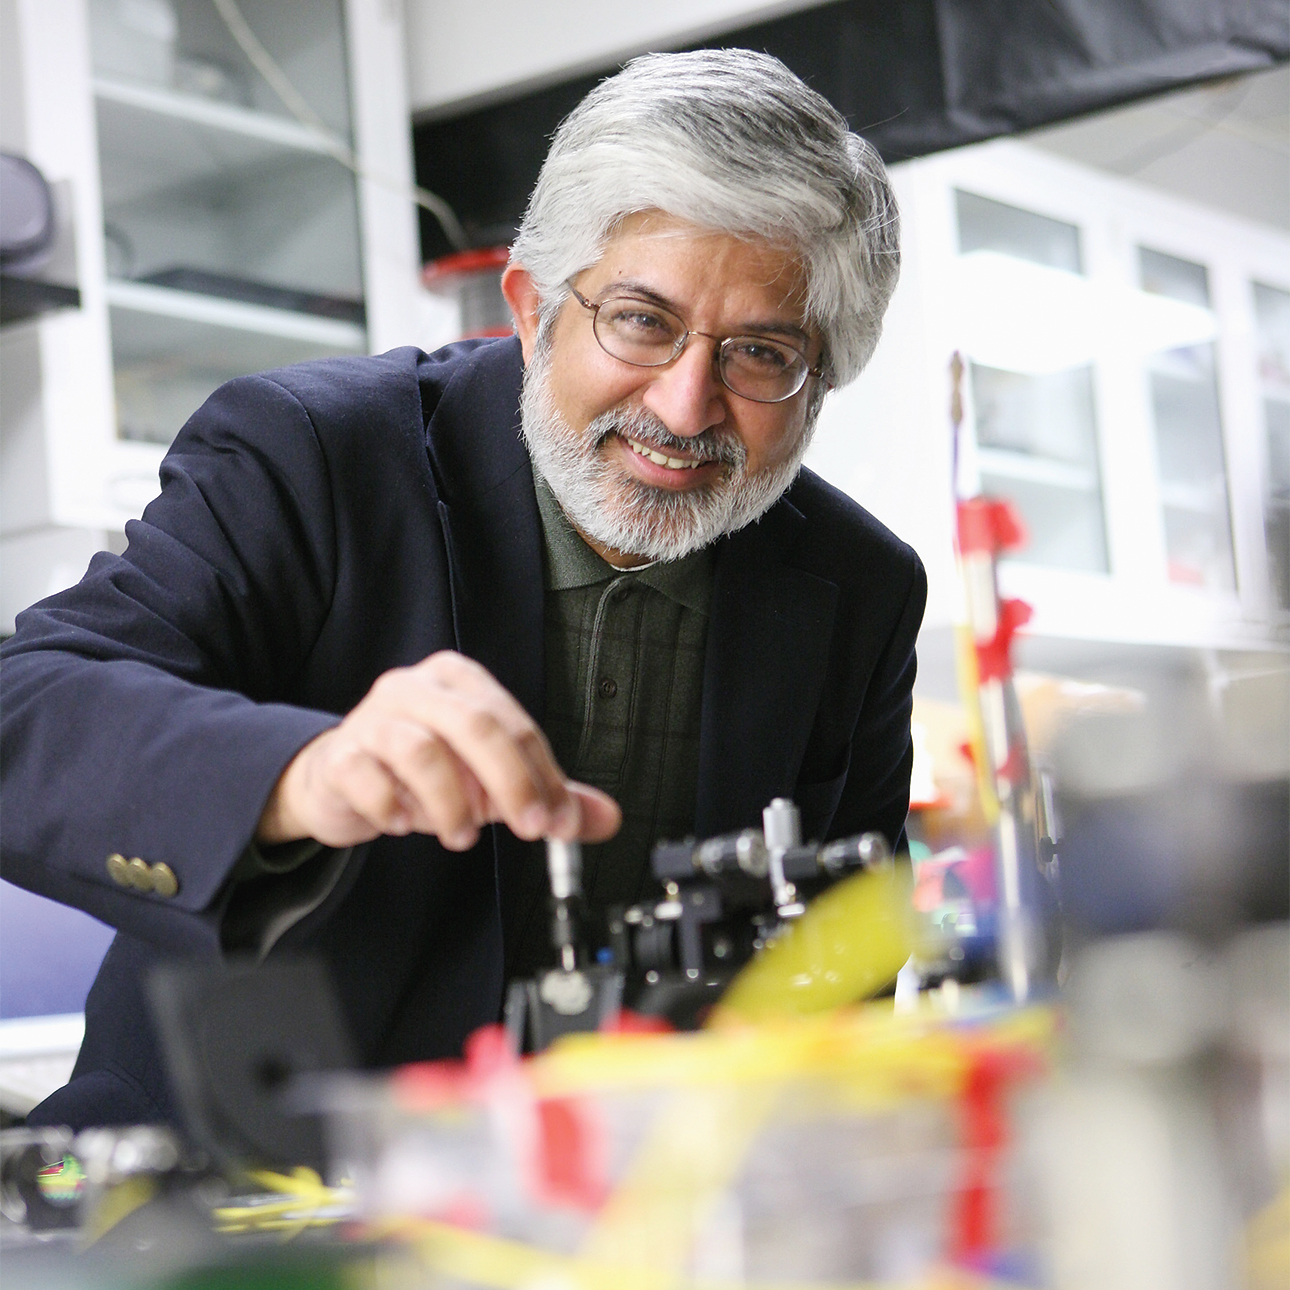 Prem Kumar smiles while standing over a lab bench with his right hand twisting a piece of metal equipment. He wears a blue blazer and a dark green shirt.